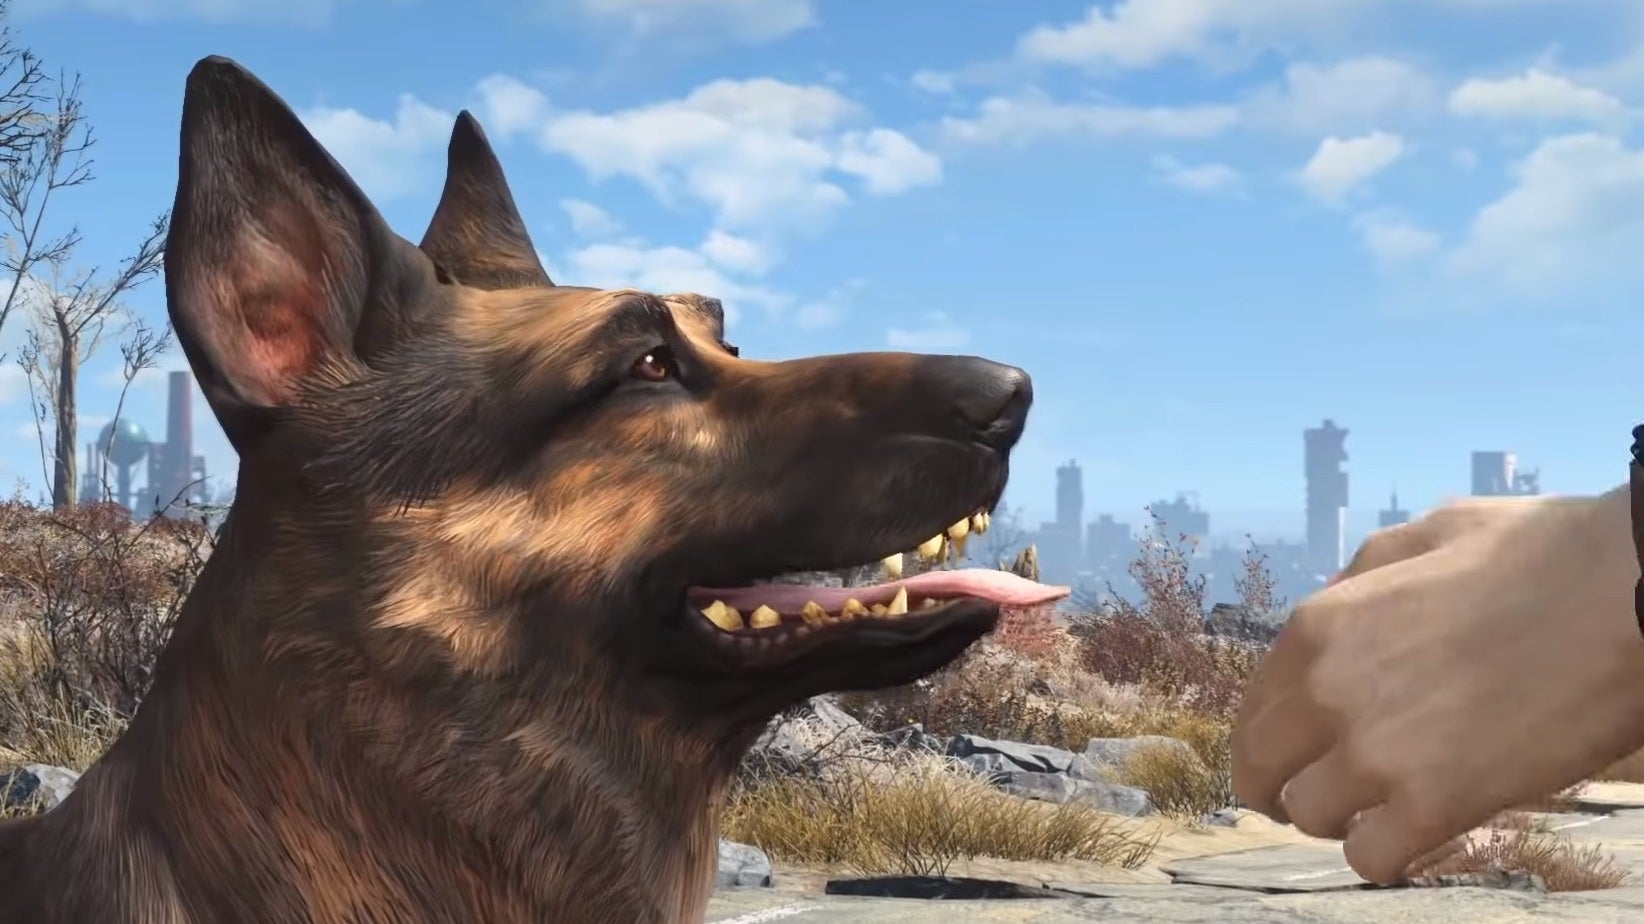 The dog that played Dogmeat in Fallout 4 has died | Rock Paper Shotgun